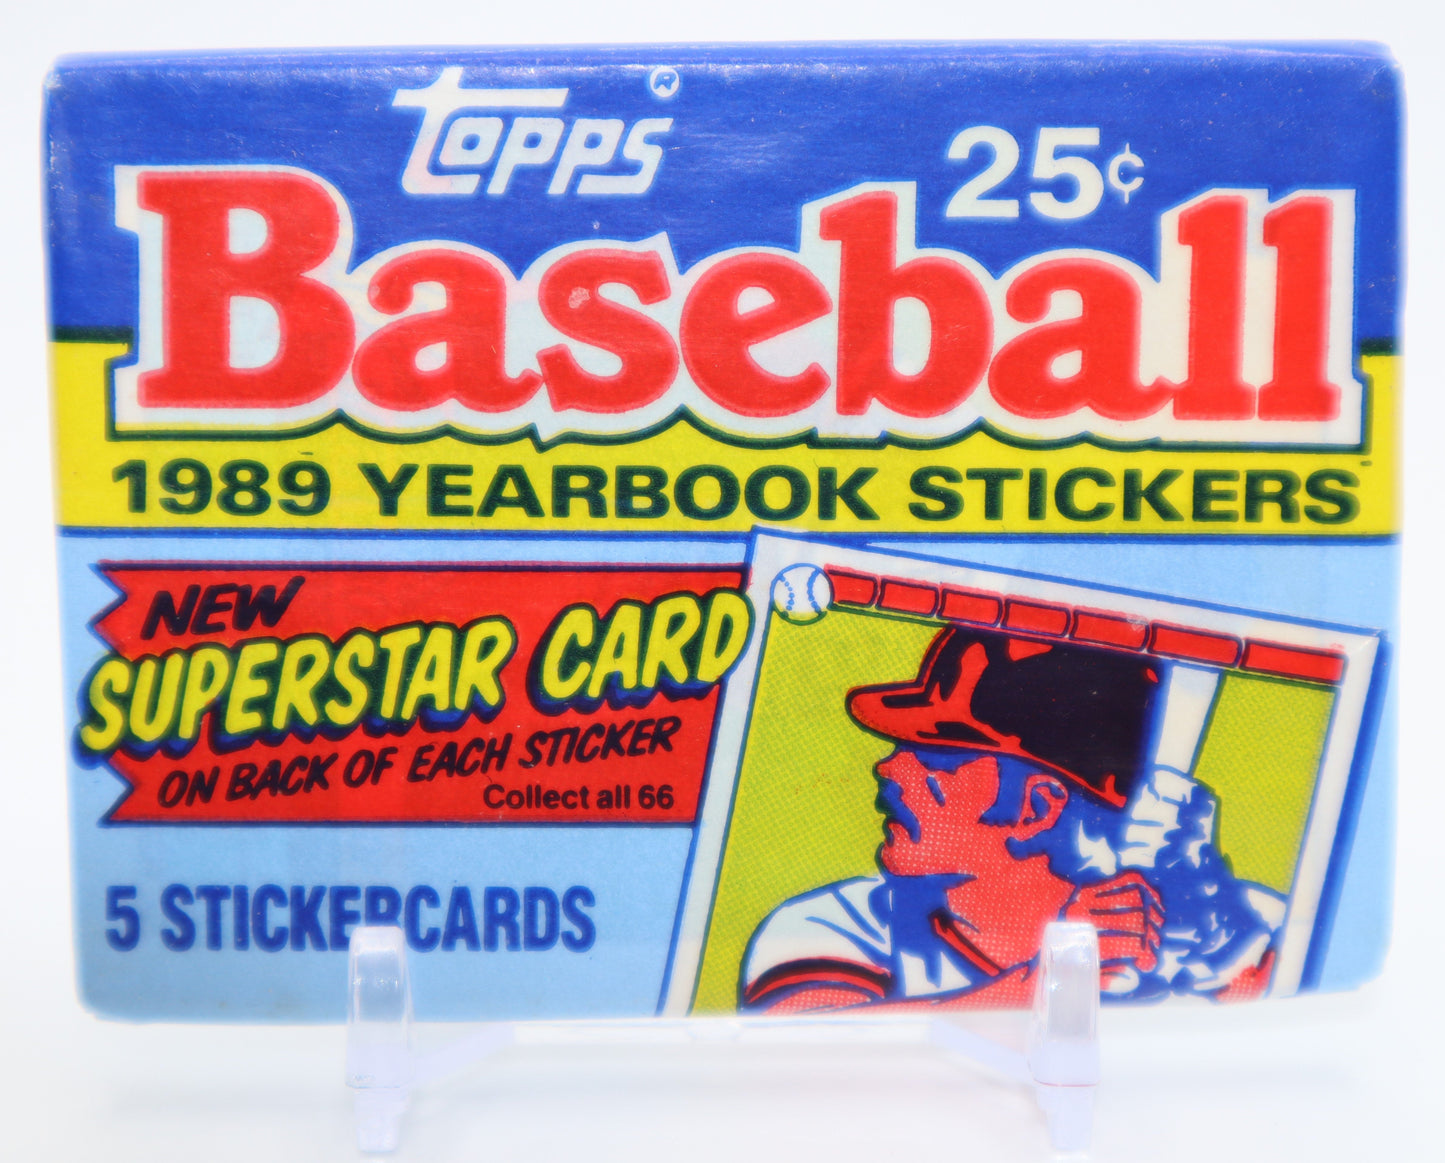 1989 Topps Baseball Album Stickers Wax Pack - Collectibles